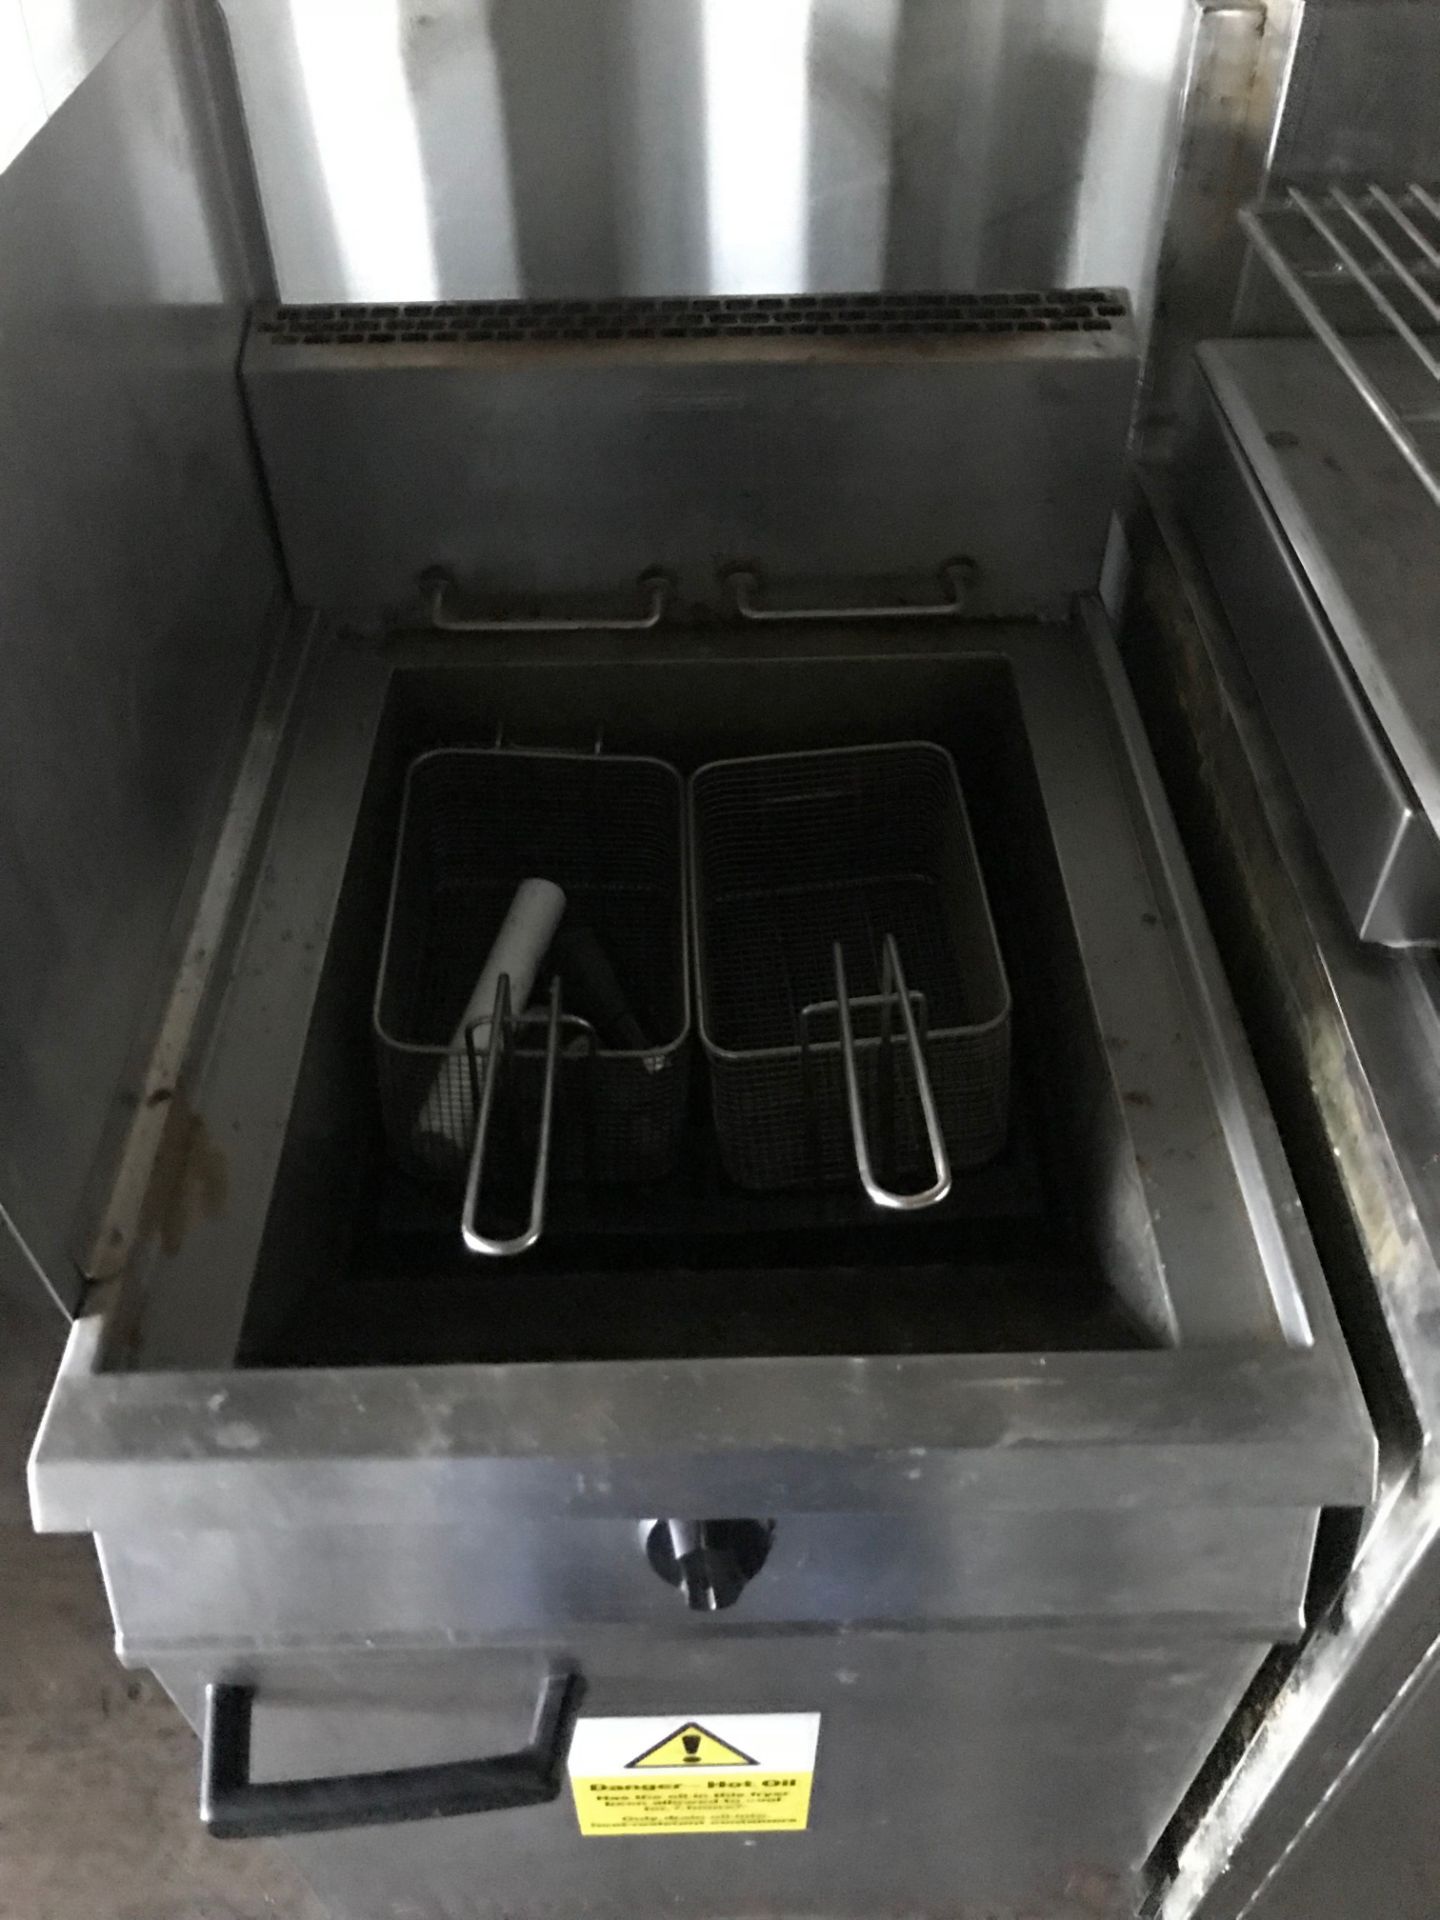 Falcon Single Tank Gas fryer Single tank Twin basket gas fryer. Perfect for frying chips and a